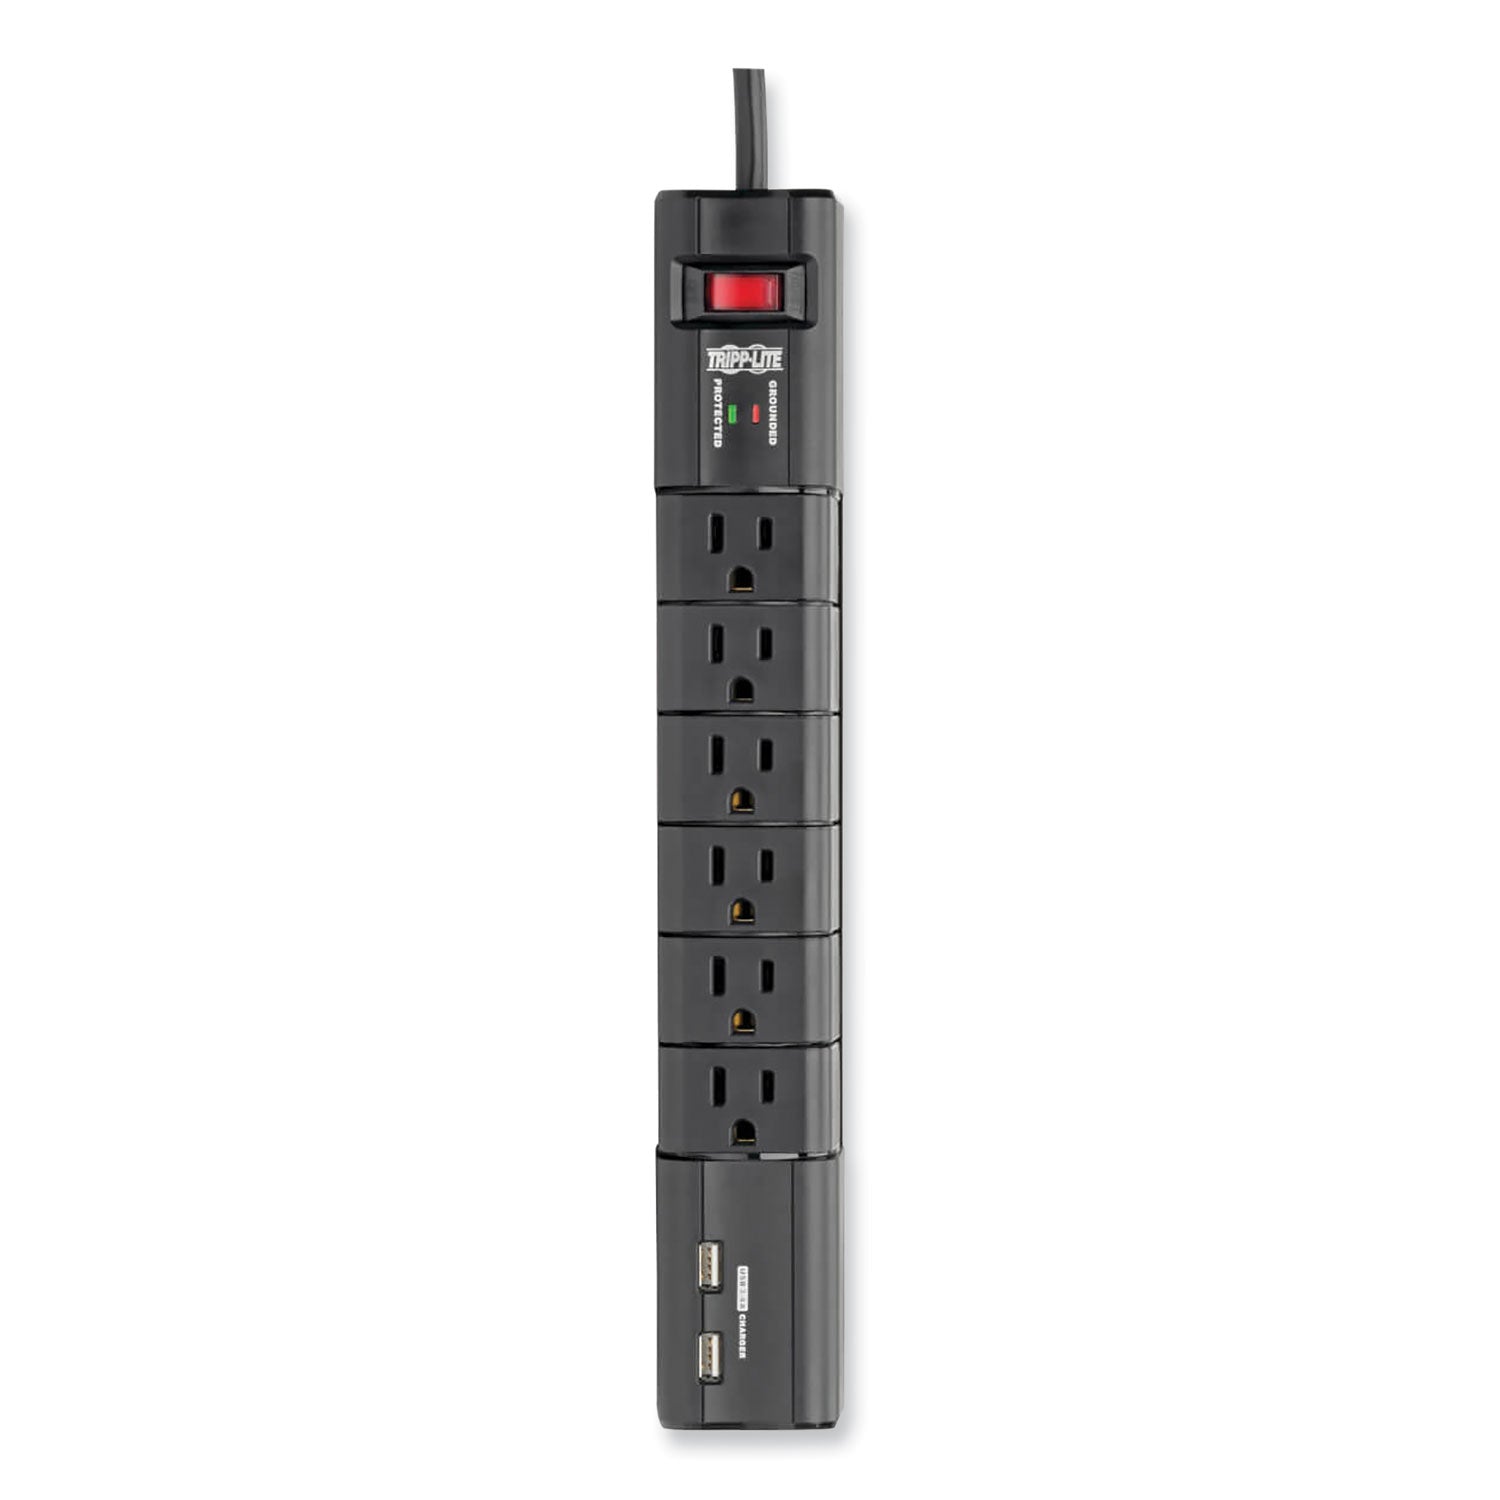 protect-it!-surge-protector-6-ac-outlets-2-usb-ports-8-ft-cord-1080-j-black_trptlp608rusbb - 4